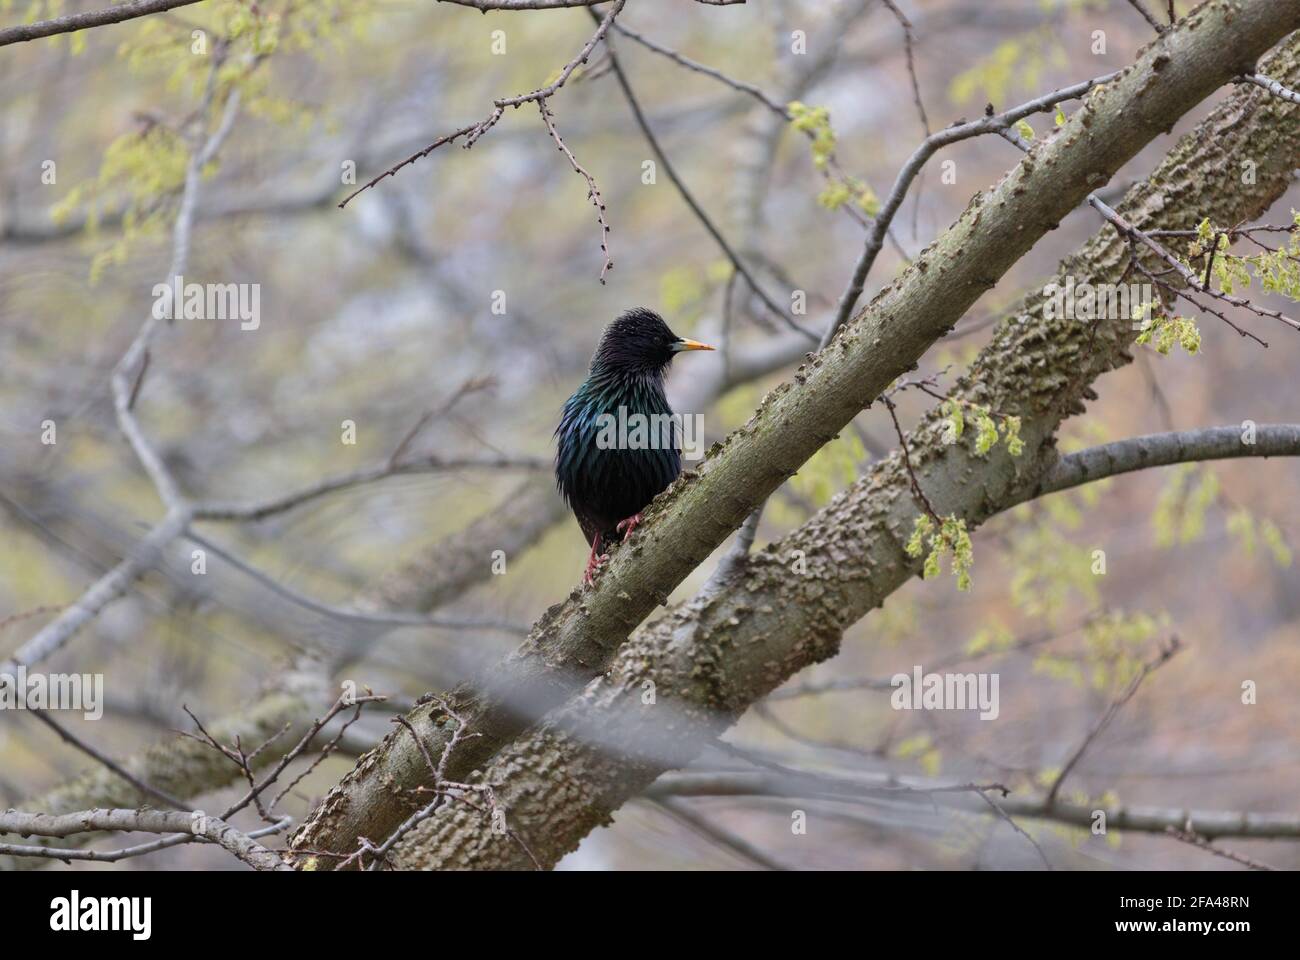 common starling in breeding season perched on a tree branch looking to the side; shimmering irridescent blue, green, purple and black feathers Stock Photo